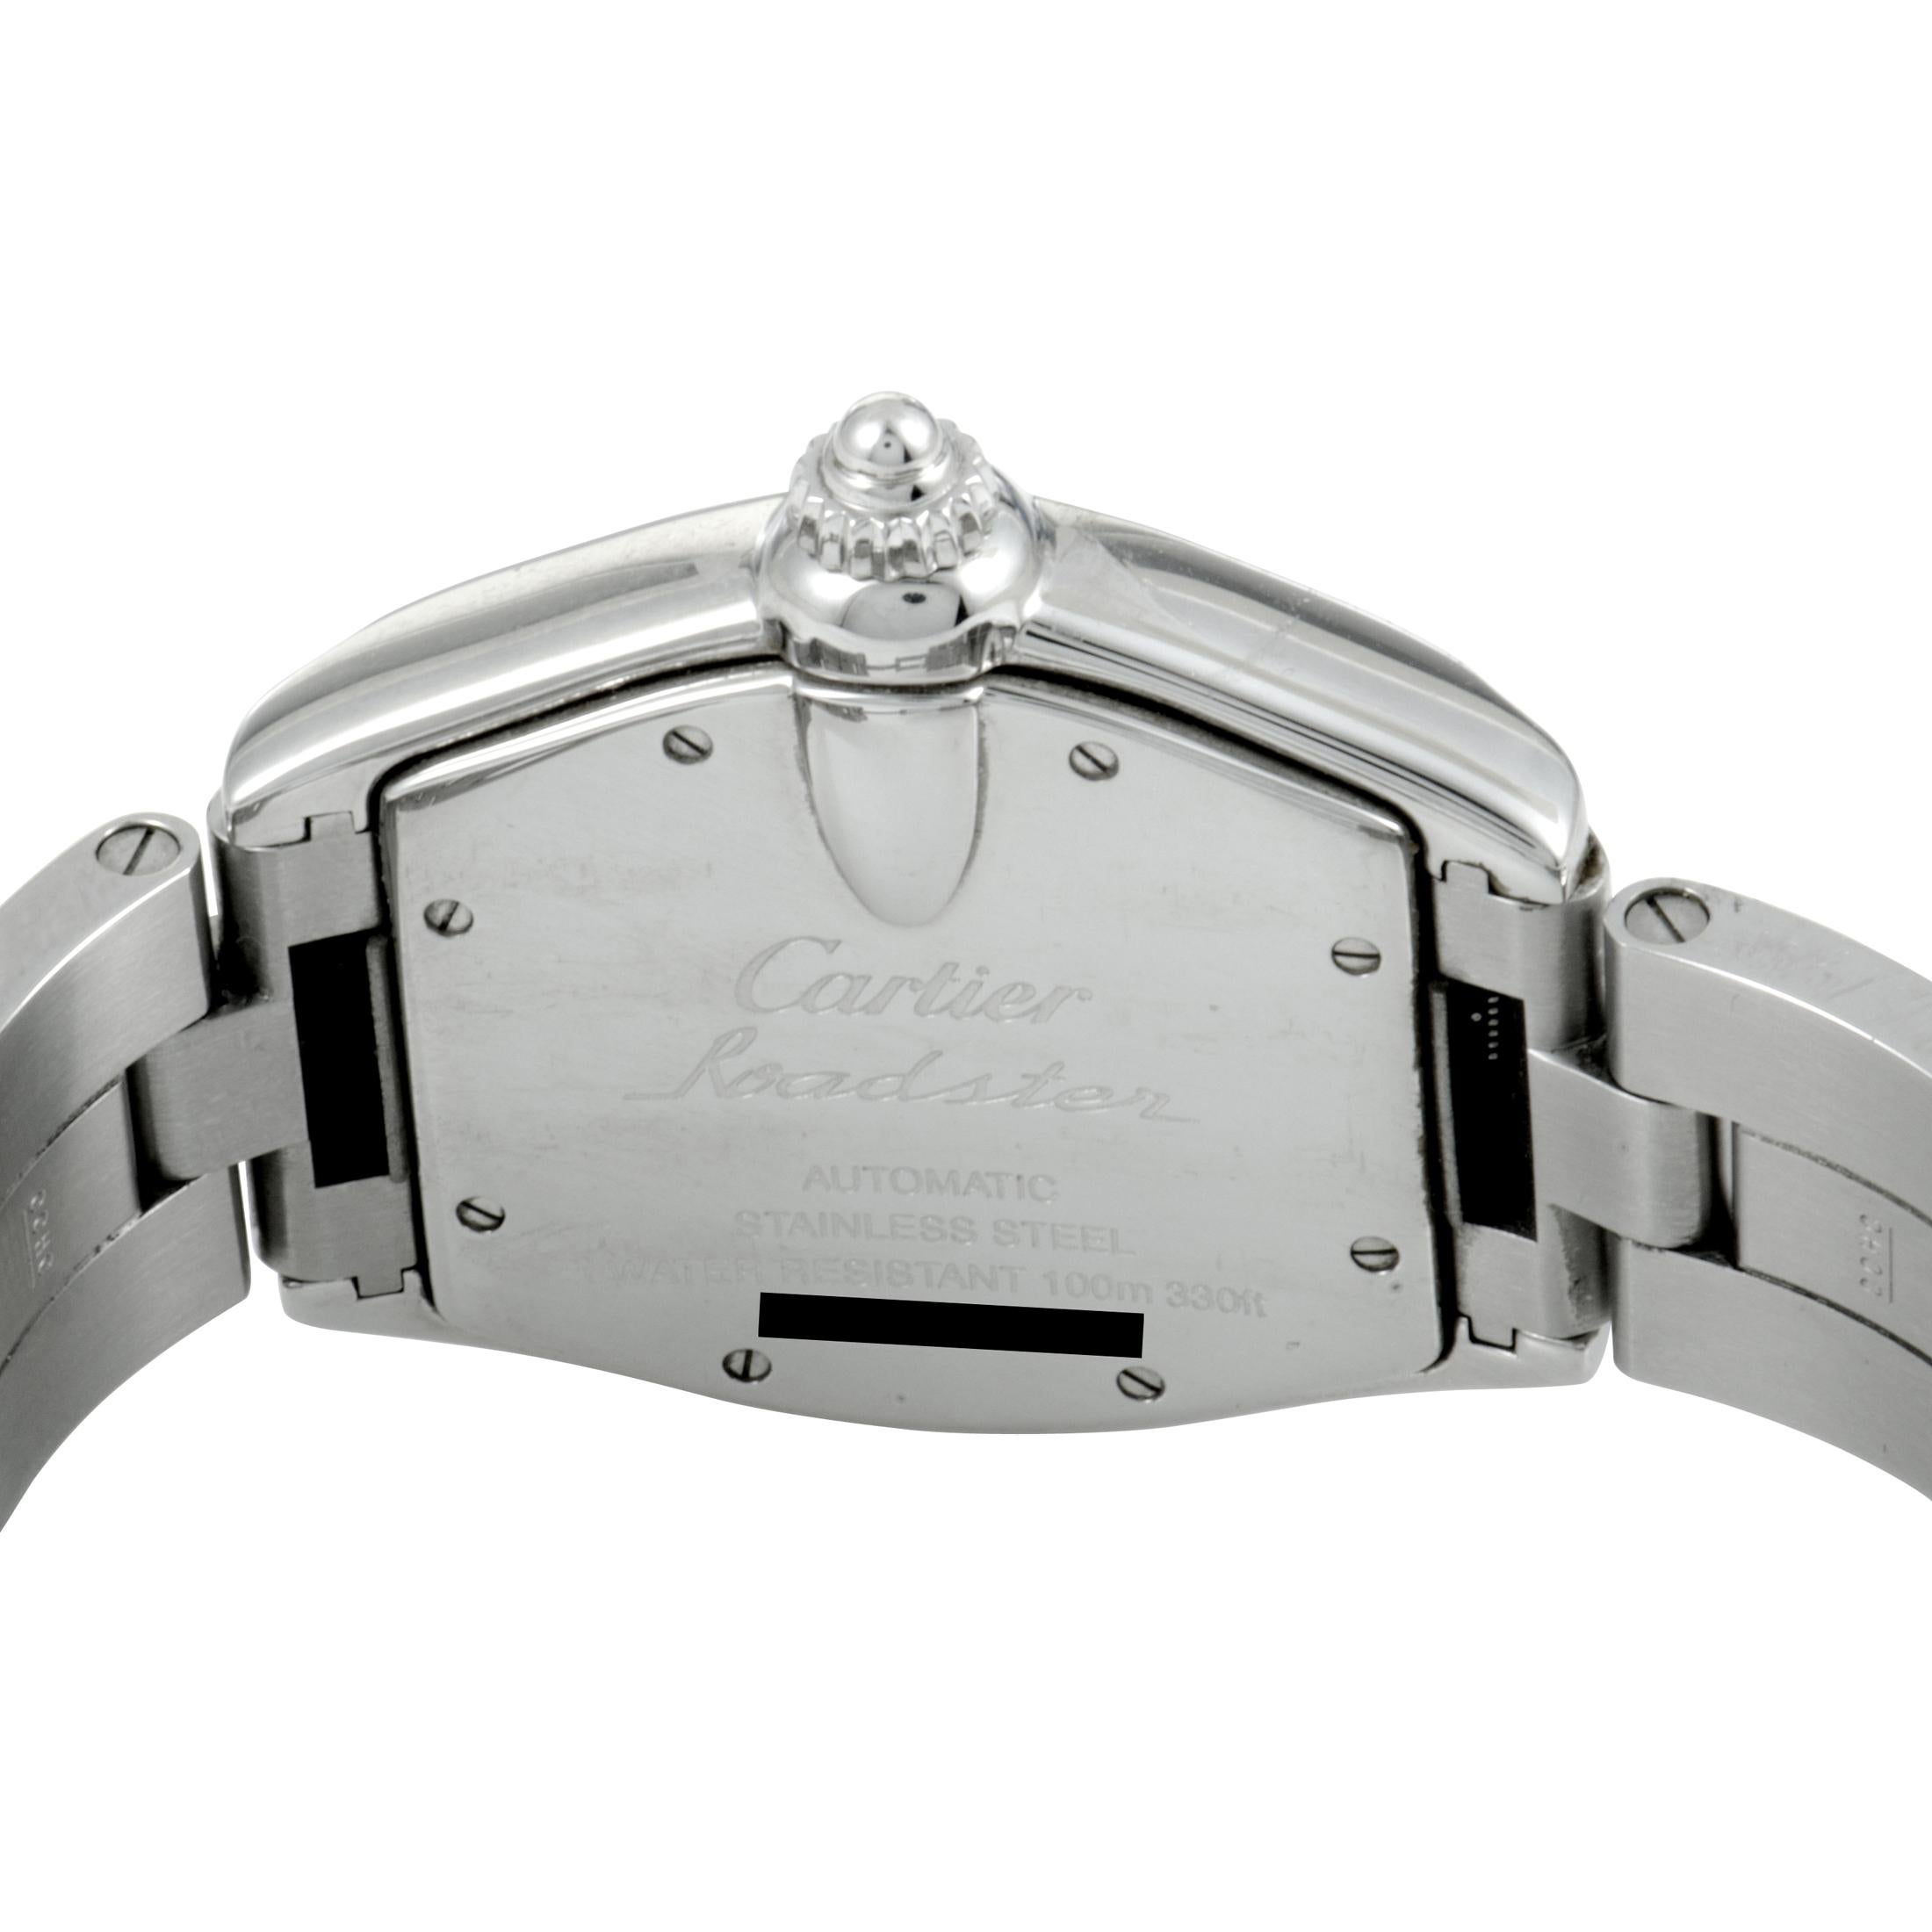 Uncharacteristically pragmatic for the brand’s timelessly refined and traditionally subtle style, this fantastic timepiece from Cartier focuses on ensuring optimal convenience and practicality while still retaining an enticing sense of sporty